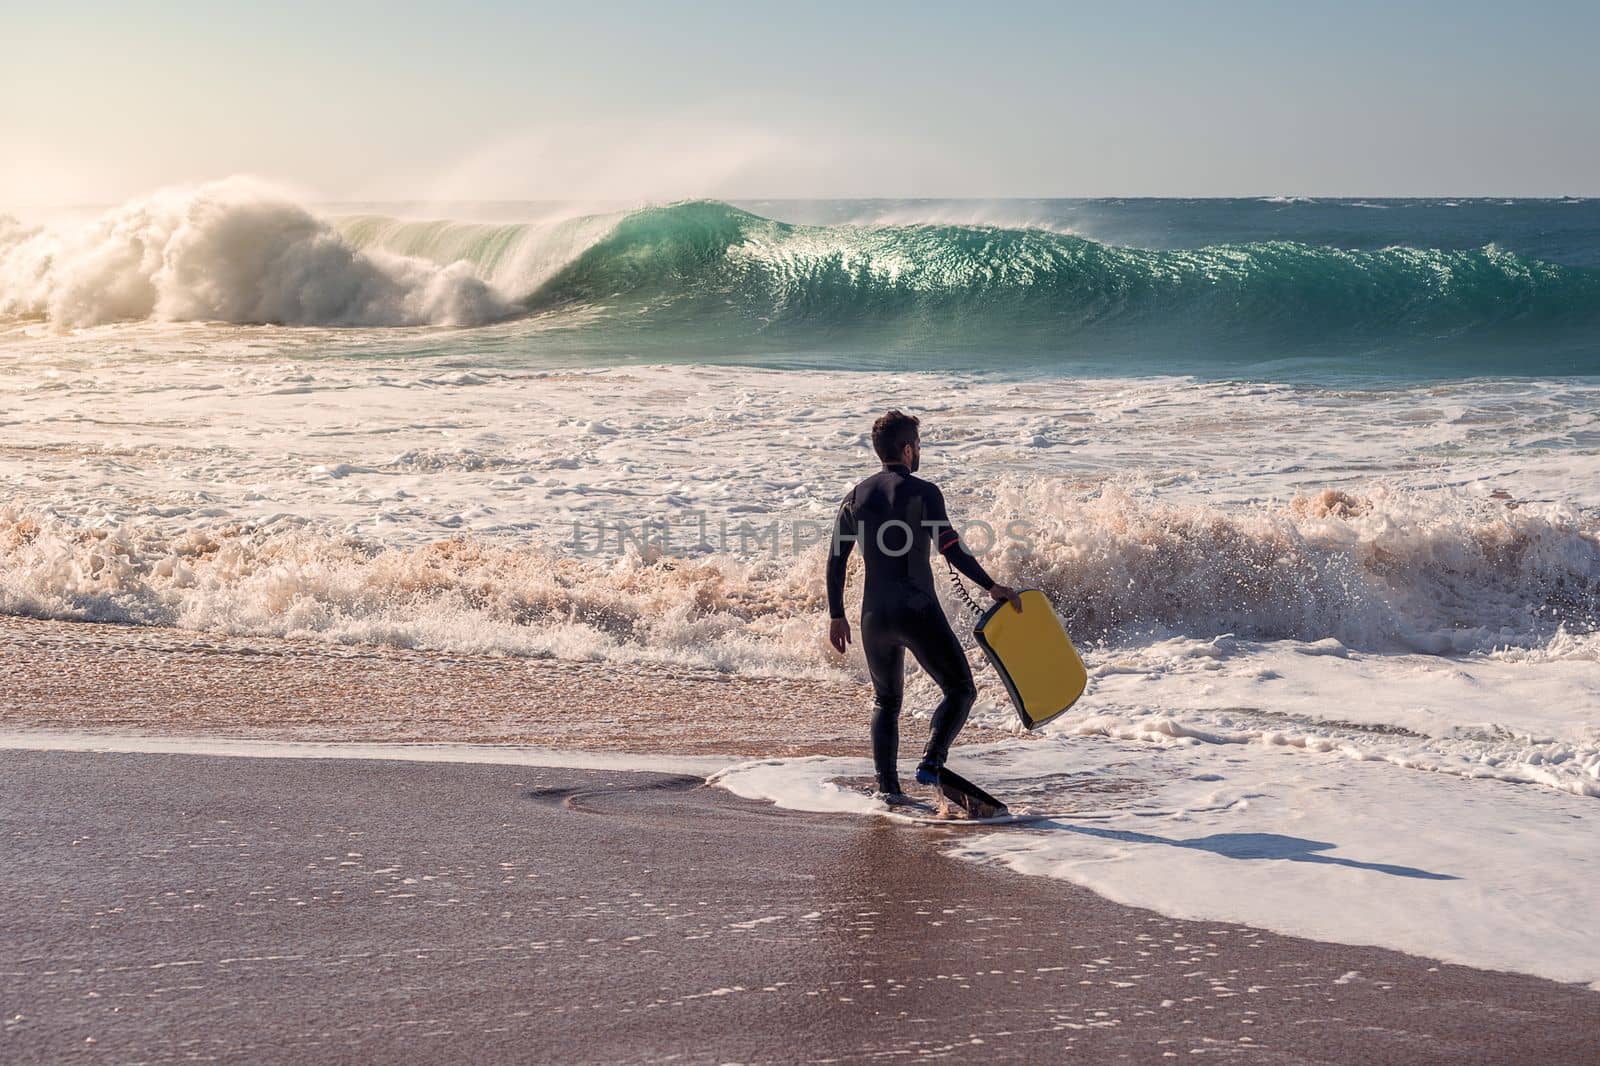 Man on the seashore prepares to surf, wears black neoprene wetsuit, in his hand has a yellow bodyboard. An awesome wave breaks with lots of energy and power, sunlight reflects on the huge pile of foam